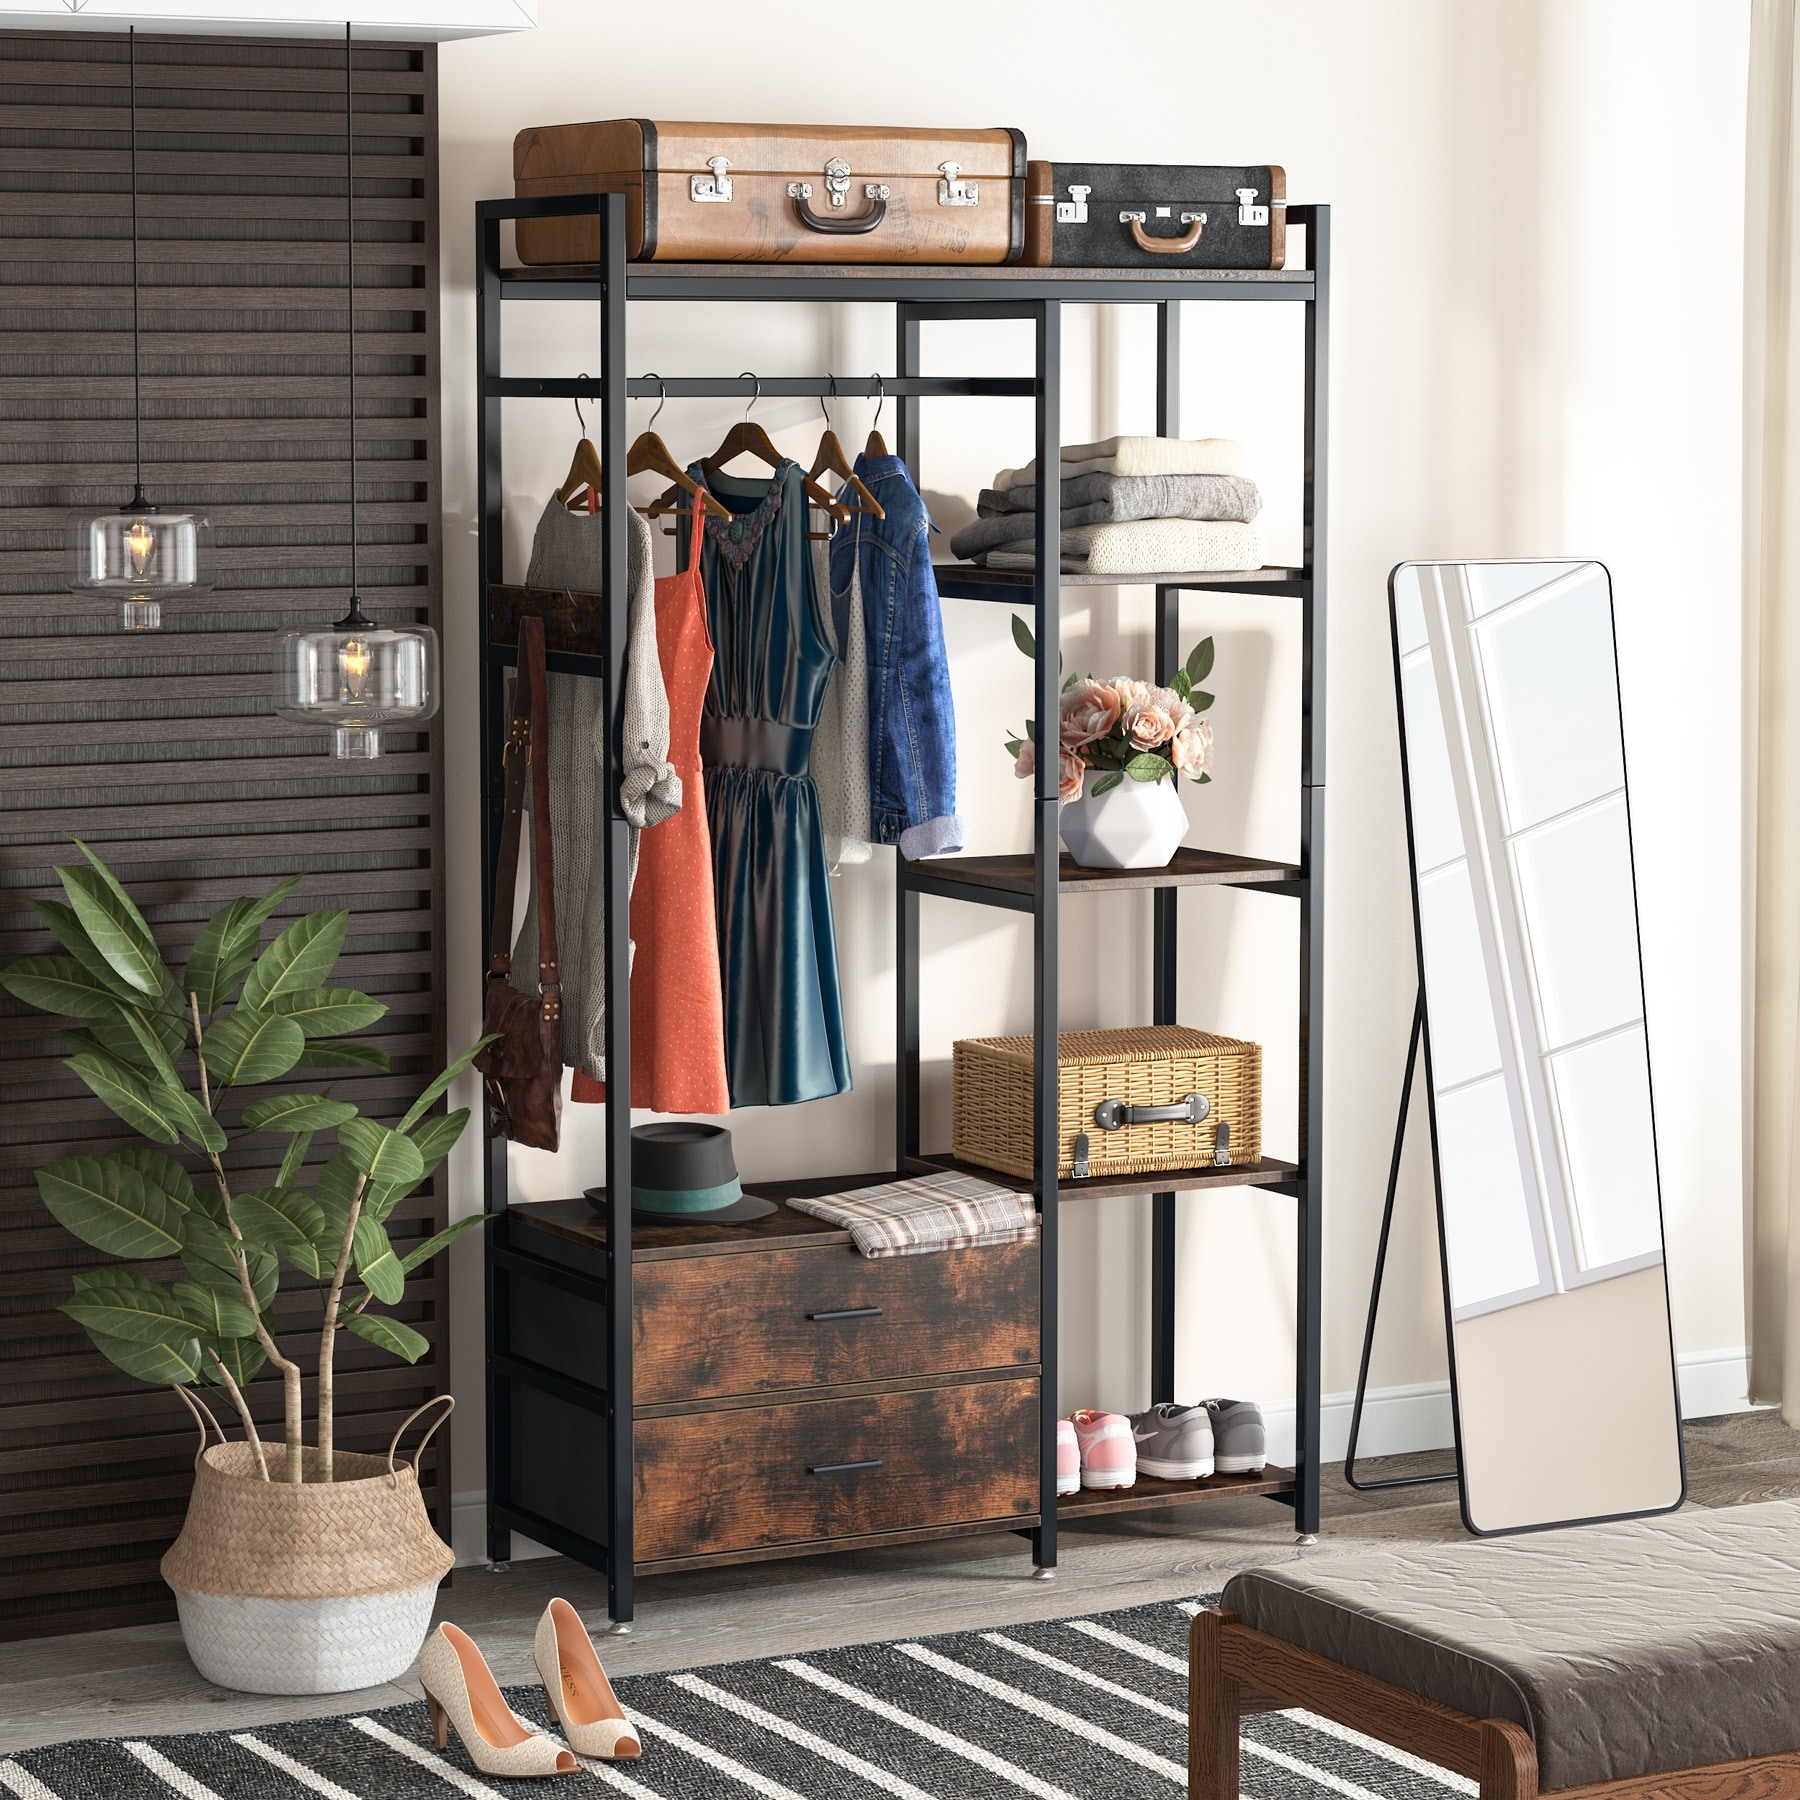 https://ak1.ostkcdn.com/images/products/is/images/direct/9883d8e9bba06ad9848ce9fd9331c51b27f63b5d/Heavy-Duty-Garment-Rack-with-2-Drawers-Shelves%2C-Hanging-Rod%2C-Freestanding-Closet-Organizer%2C-Large-Open-Wardrobe-Closet.jpg